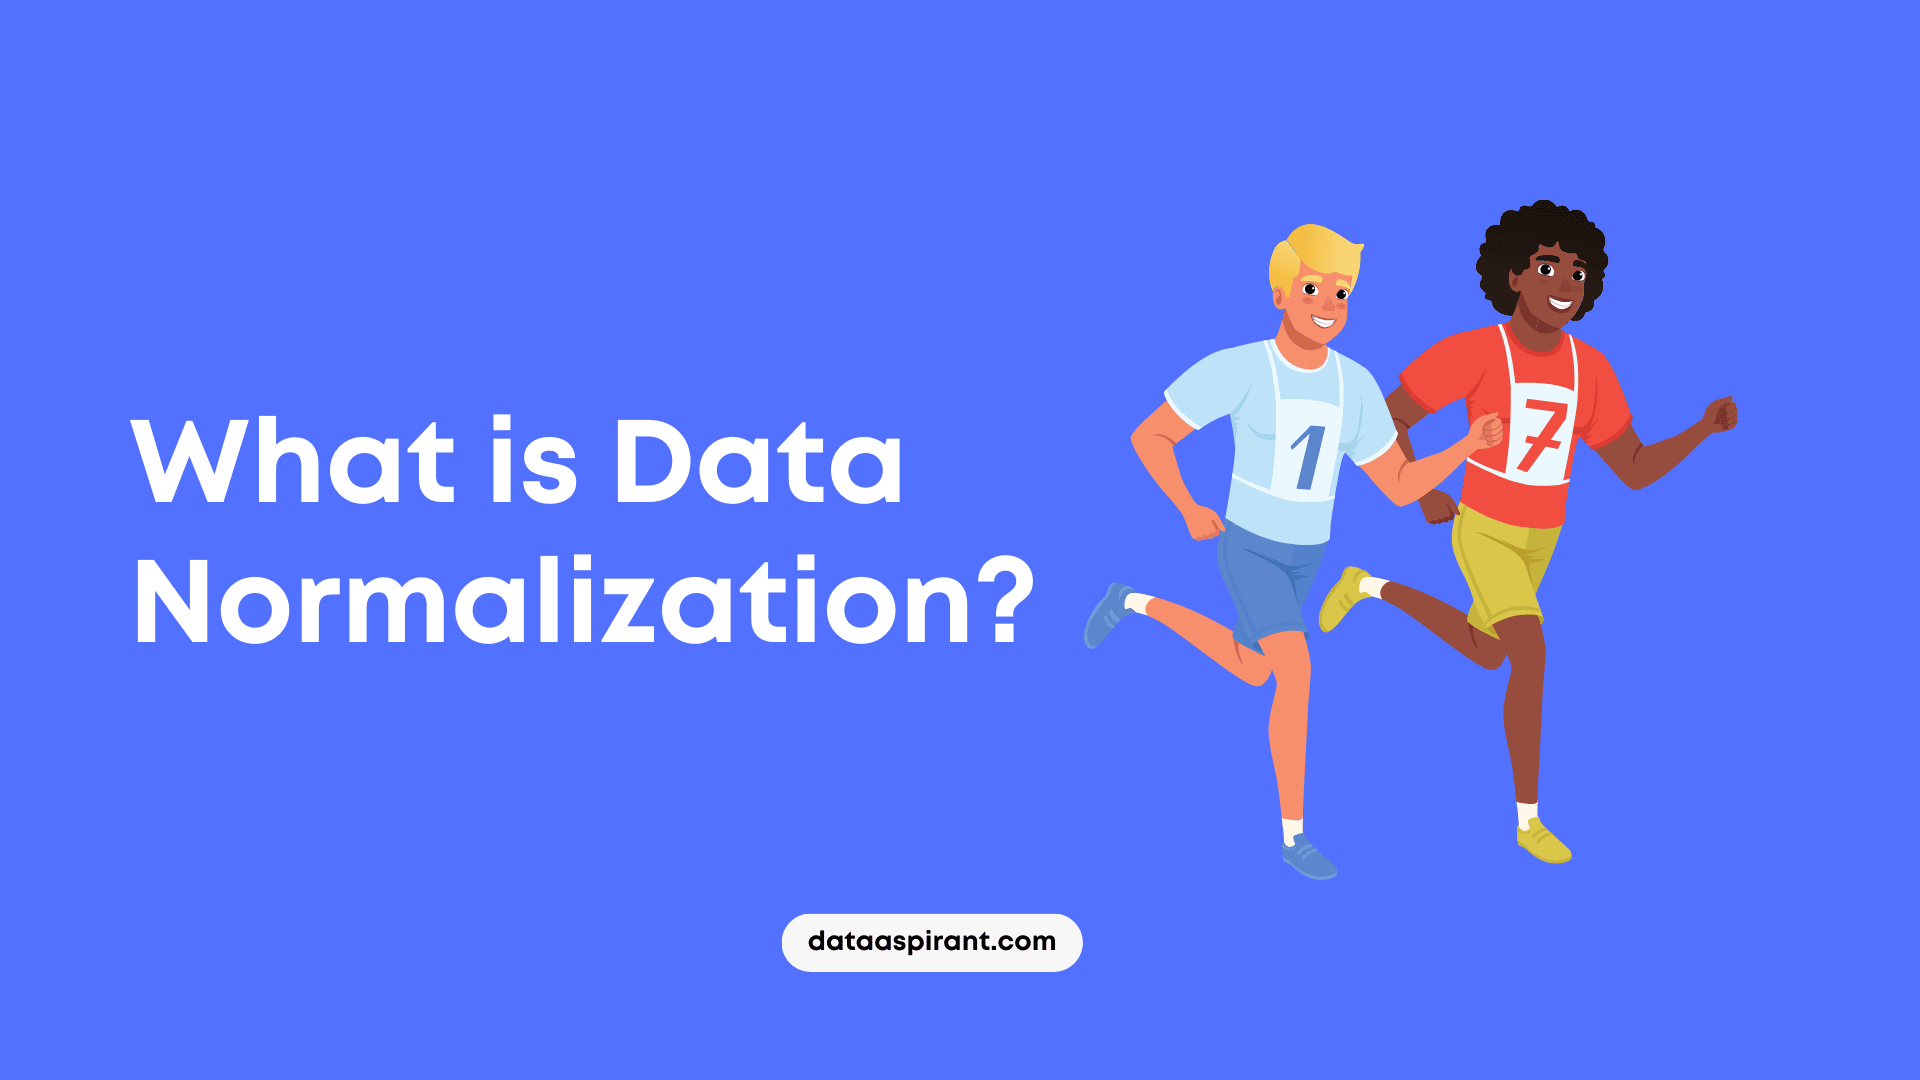 What is Data Normalization?